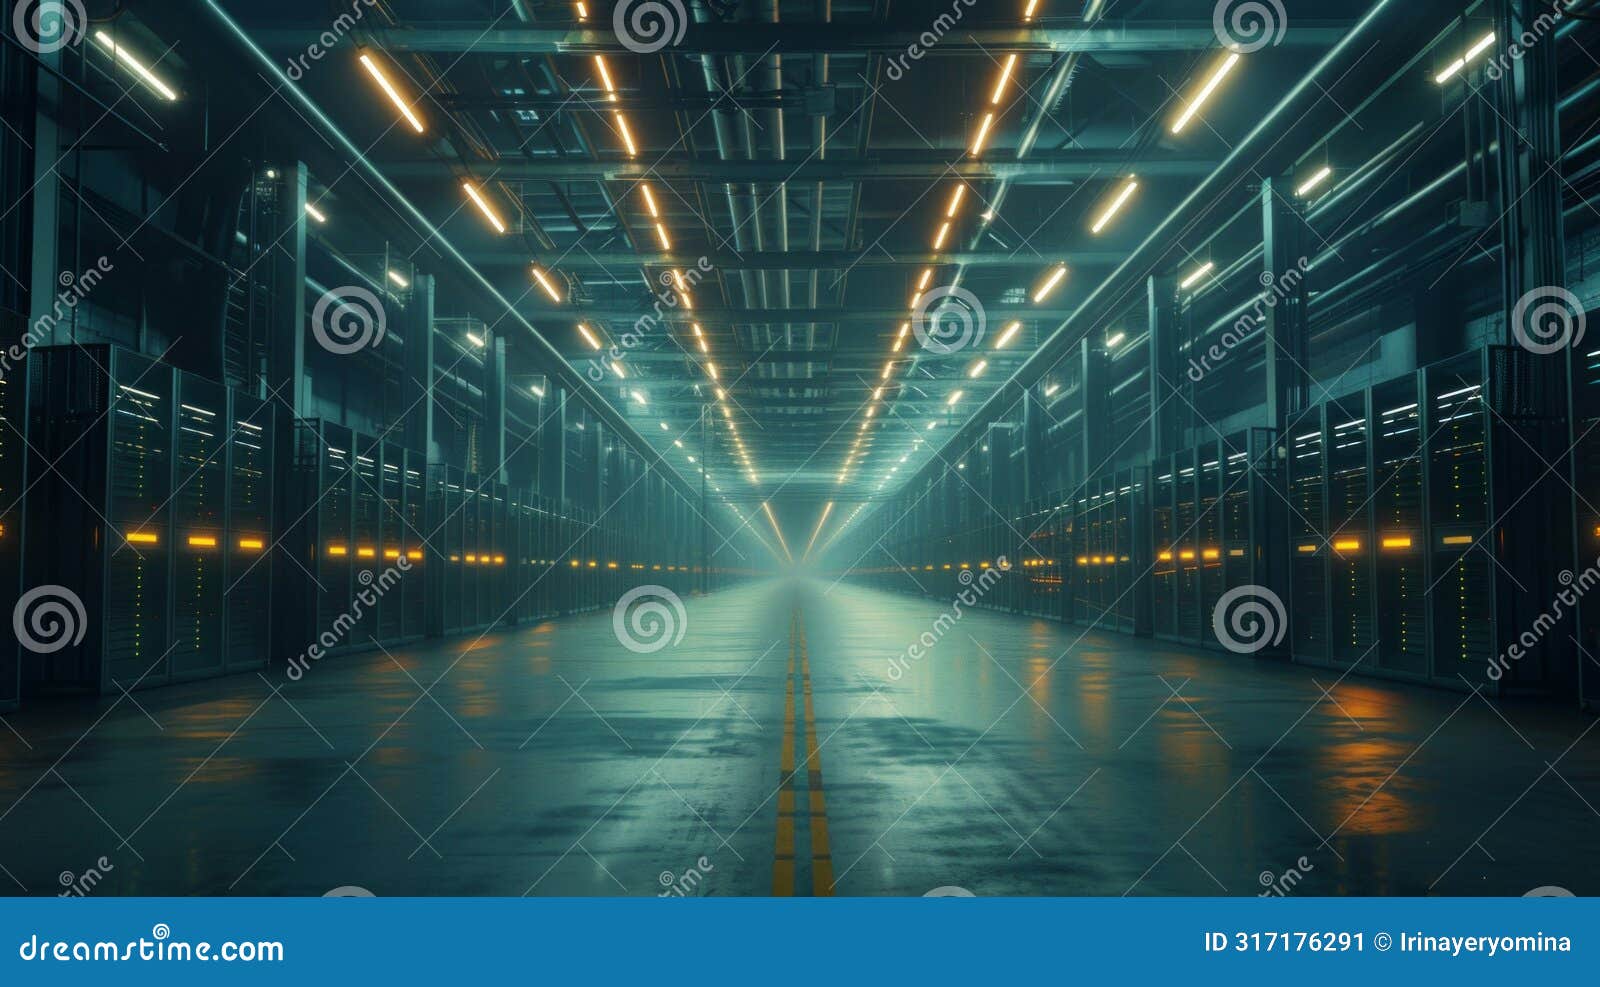 ai energy consumption: massive data centers in industrial space